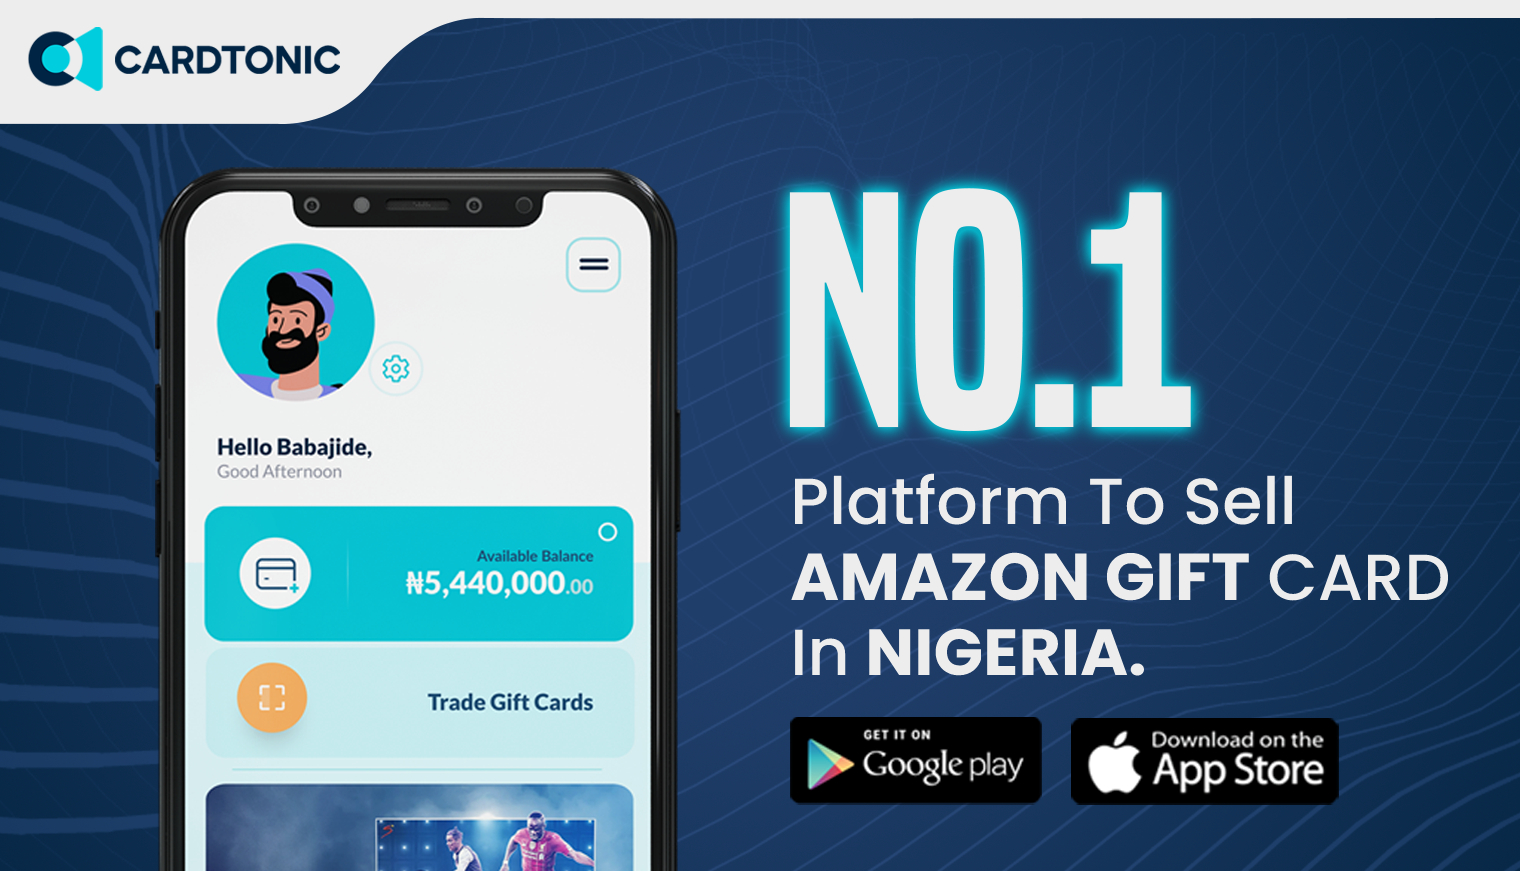 SELL AMAZON GIFT CARD IN NIGERIA